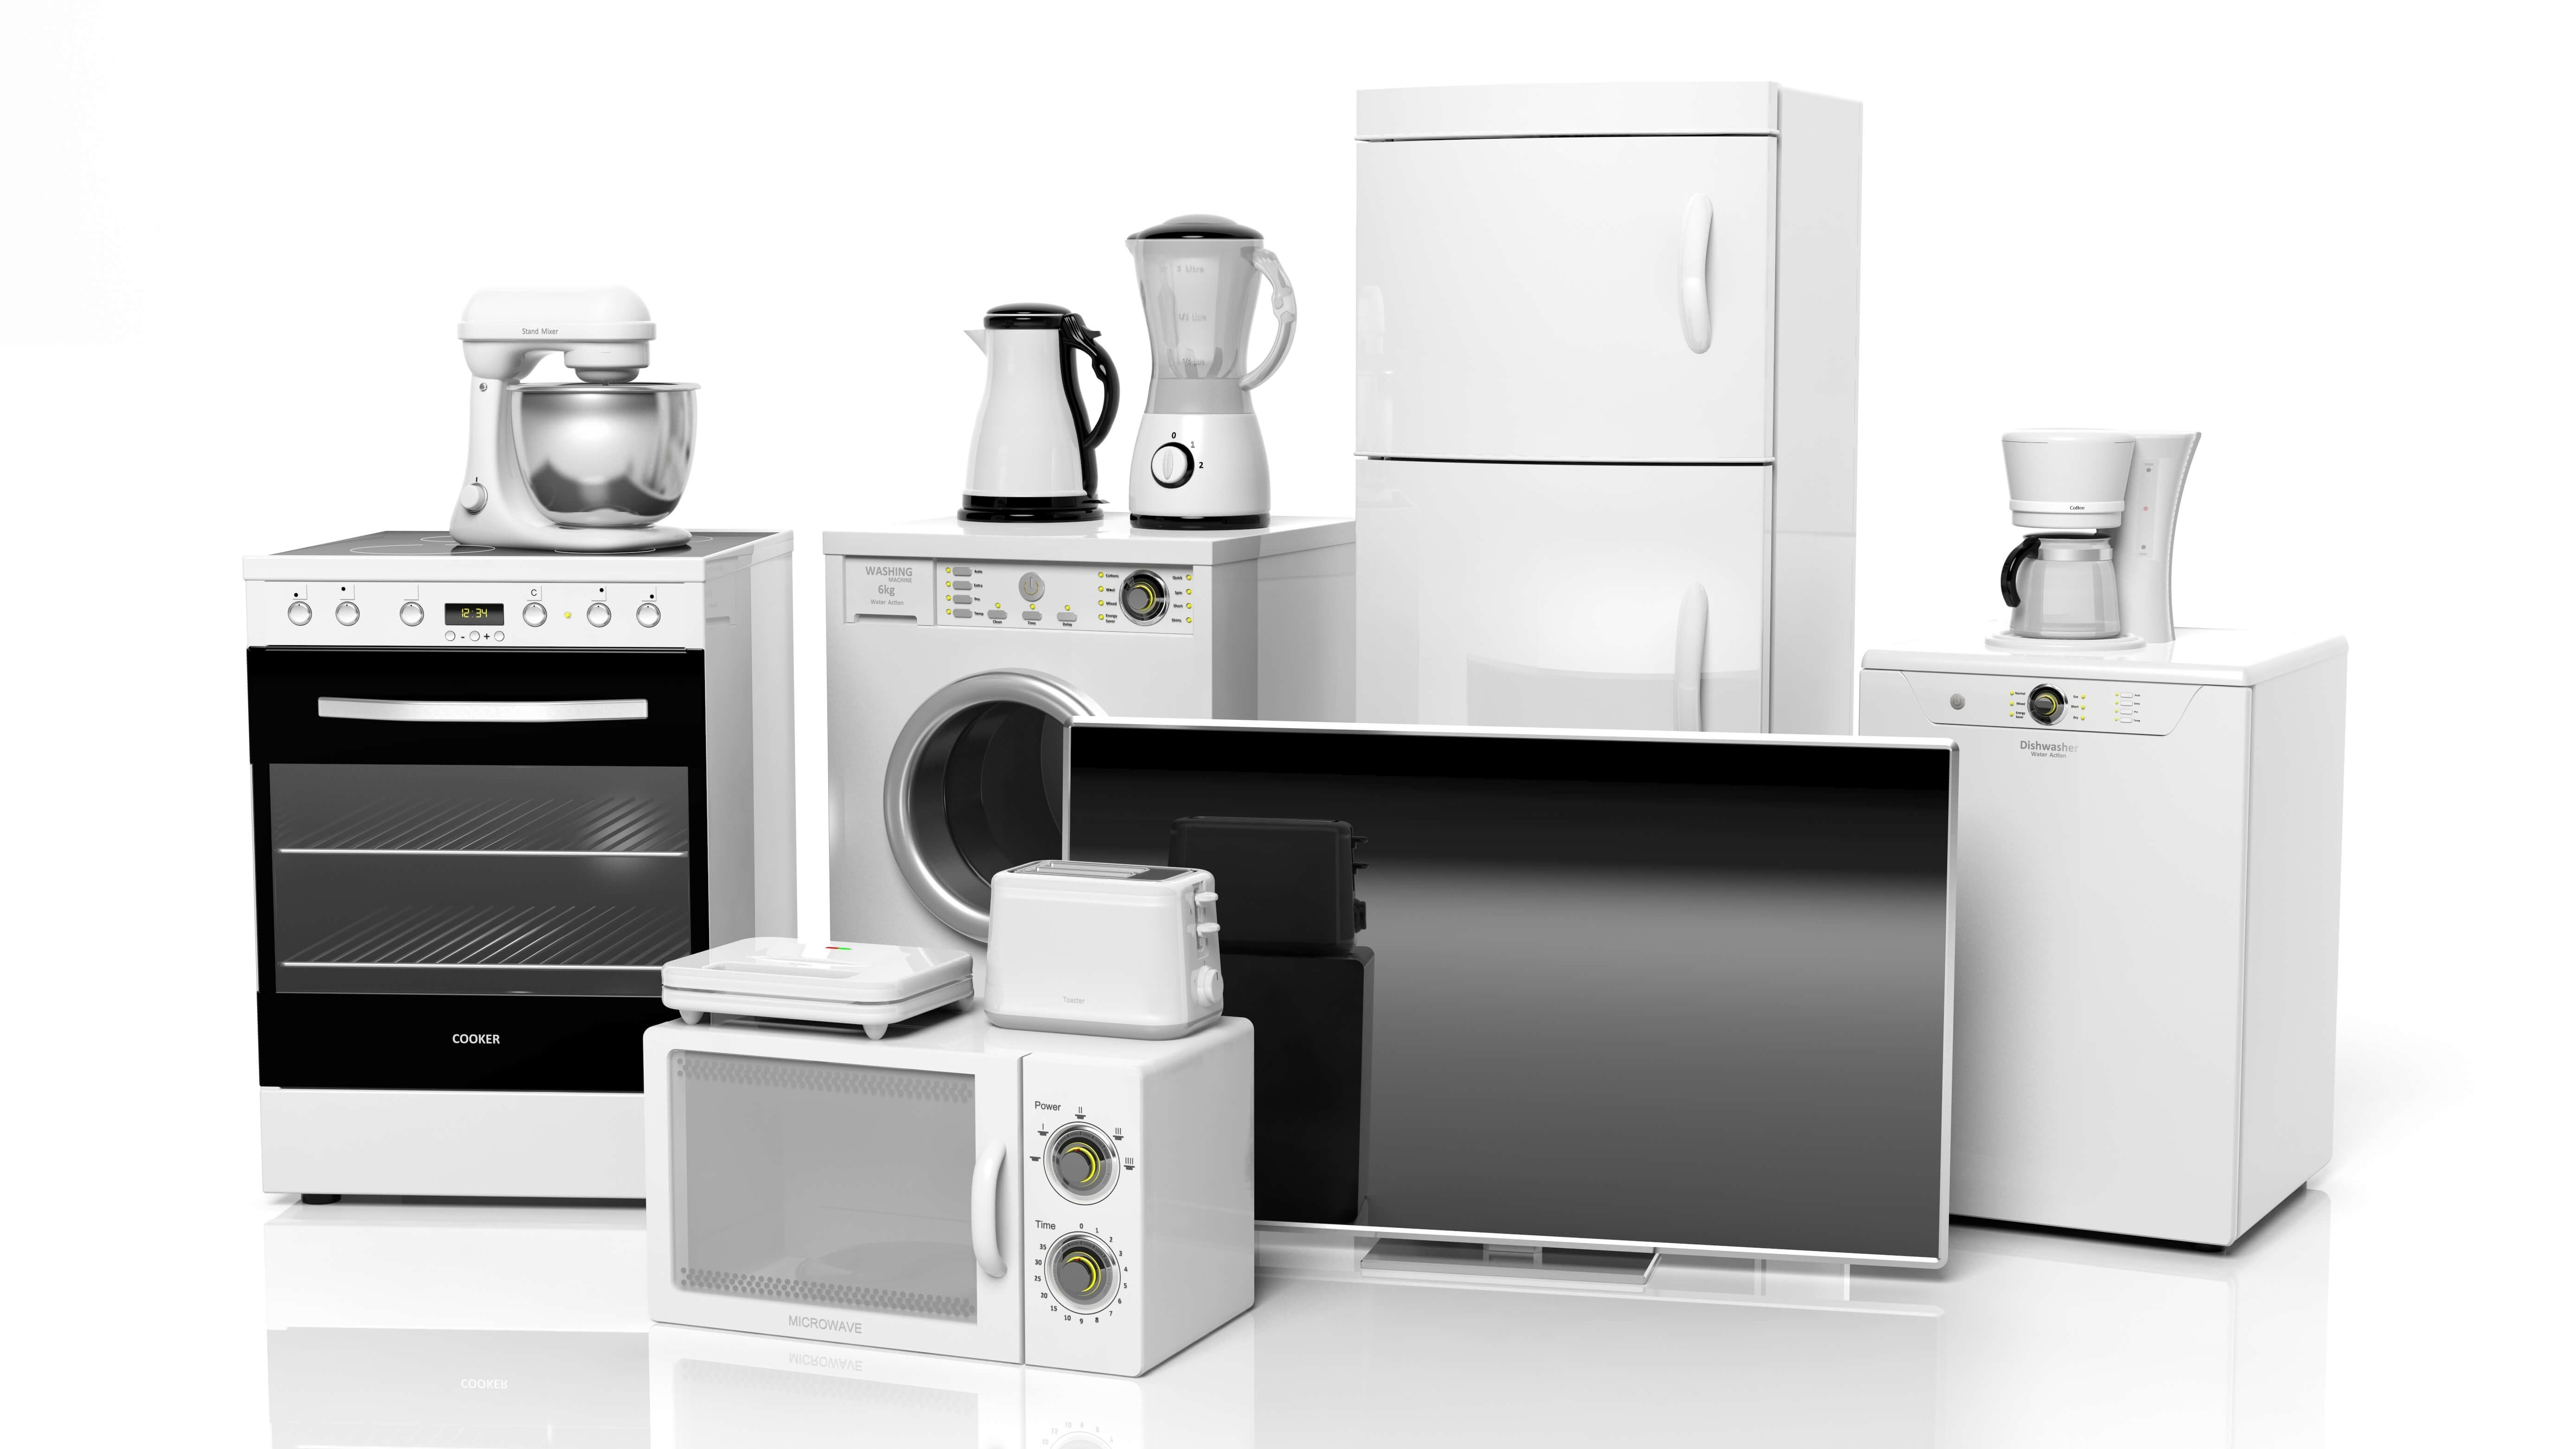 US Department of Energy: Efficiency Standards for Appliances and Equipment